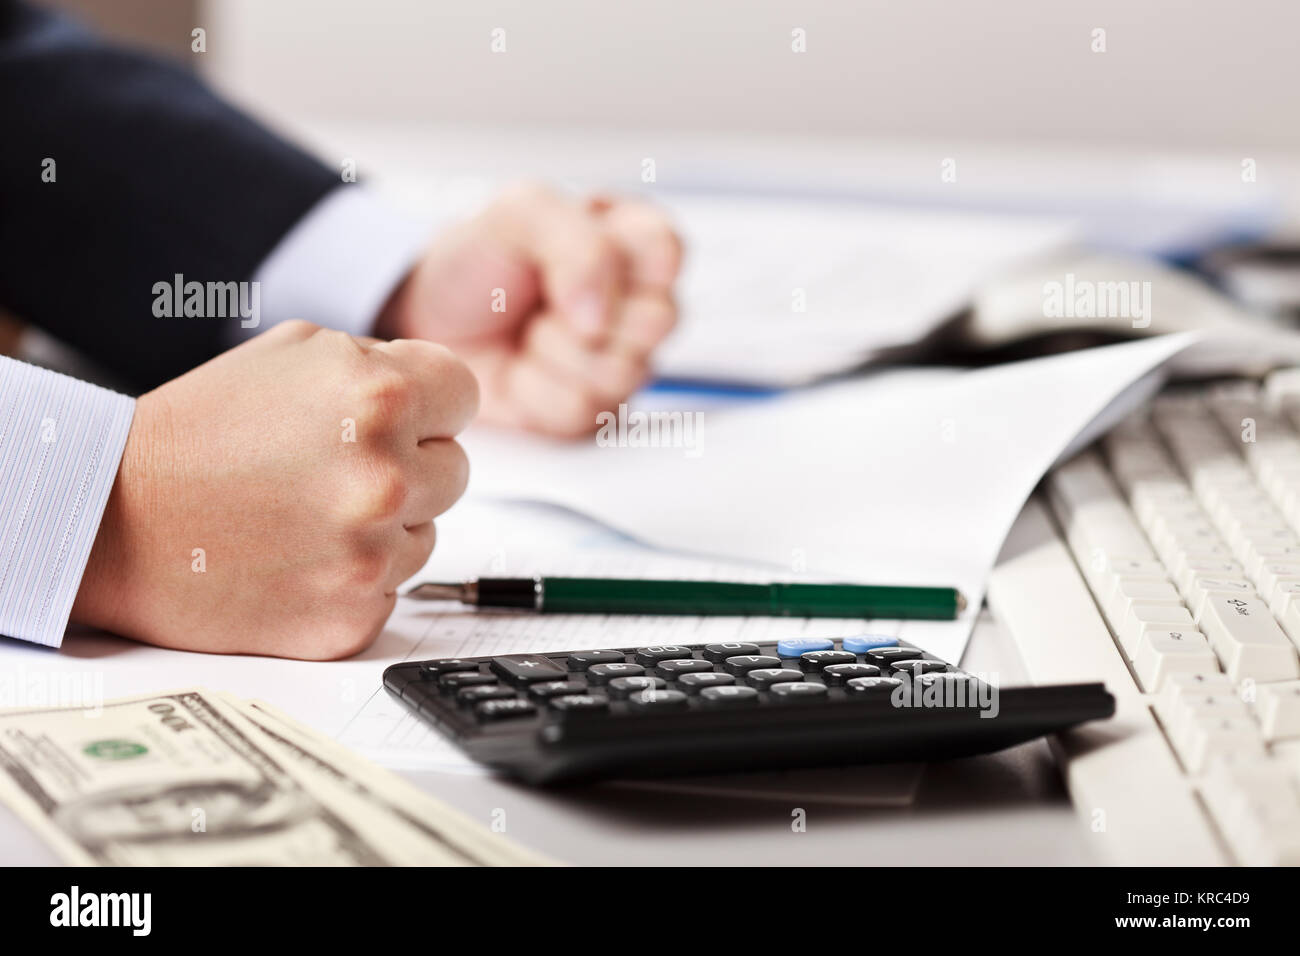 Angry business man hand banging fist on table in stress or problems at office workplace desk Stock Photo